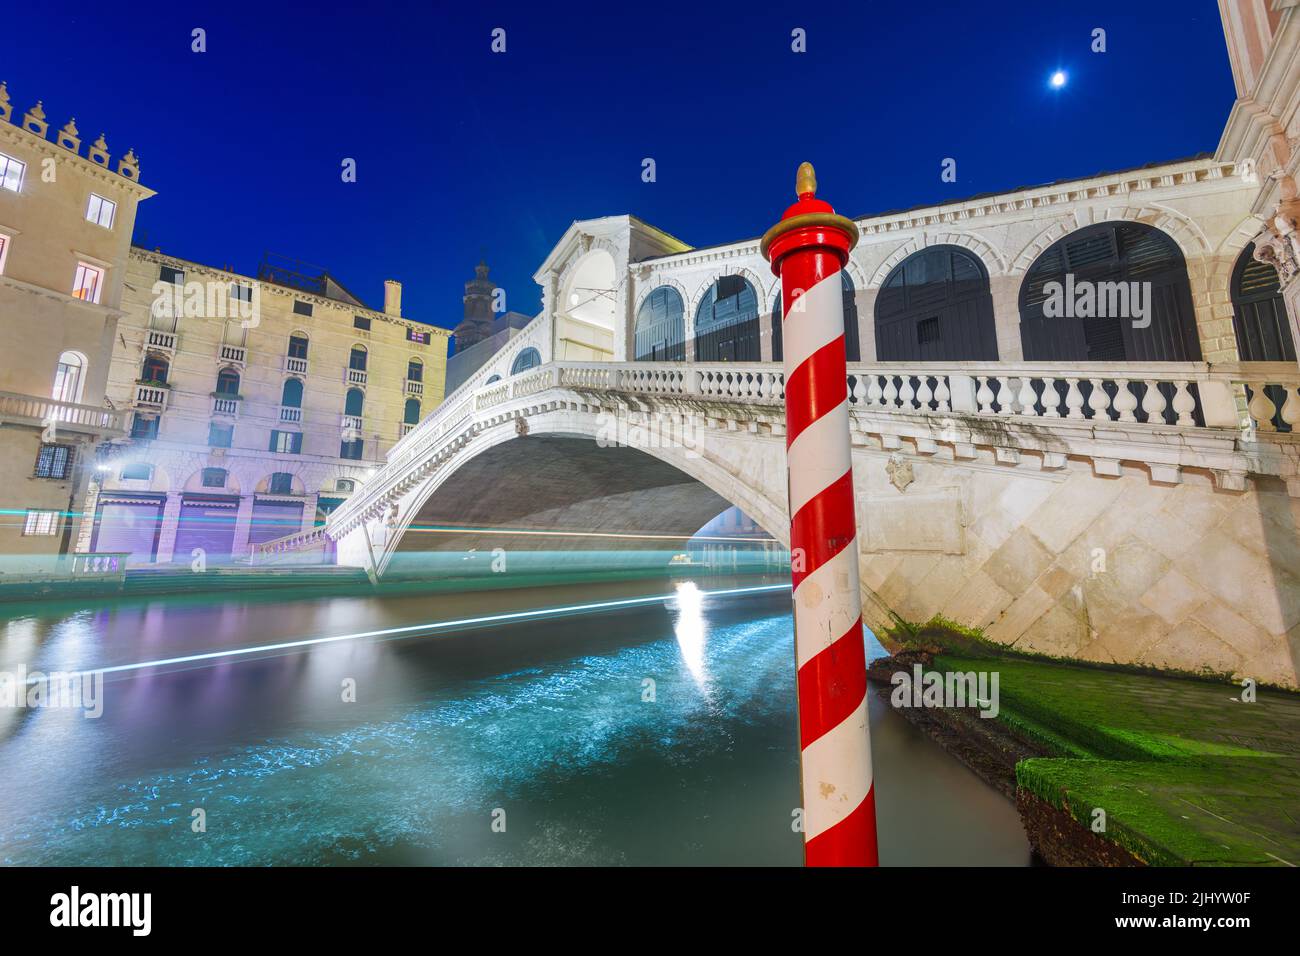 Venice, Italy with light trails on the Grand Canal passing under the Rialto Bridge at night. Stock Photo